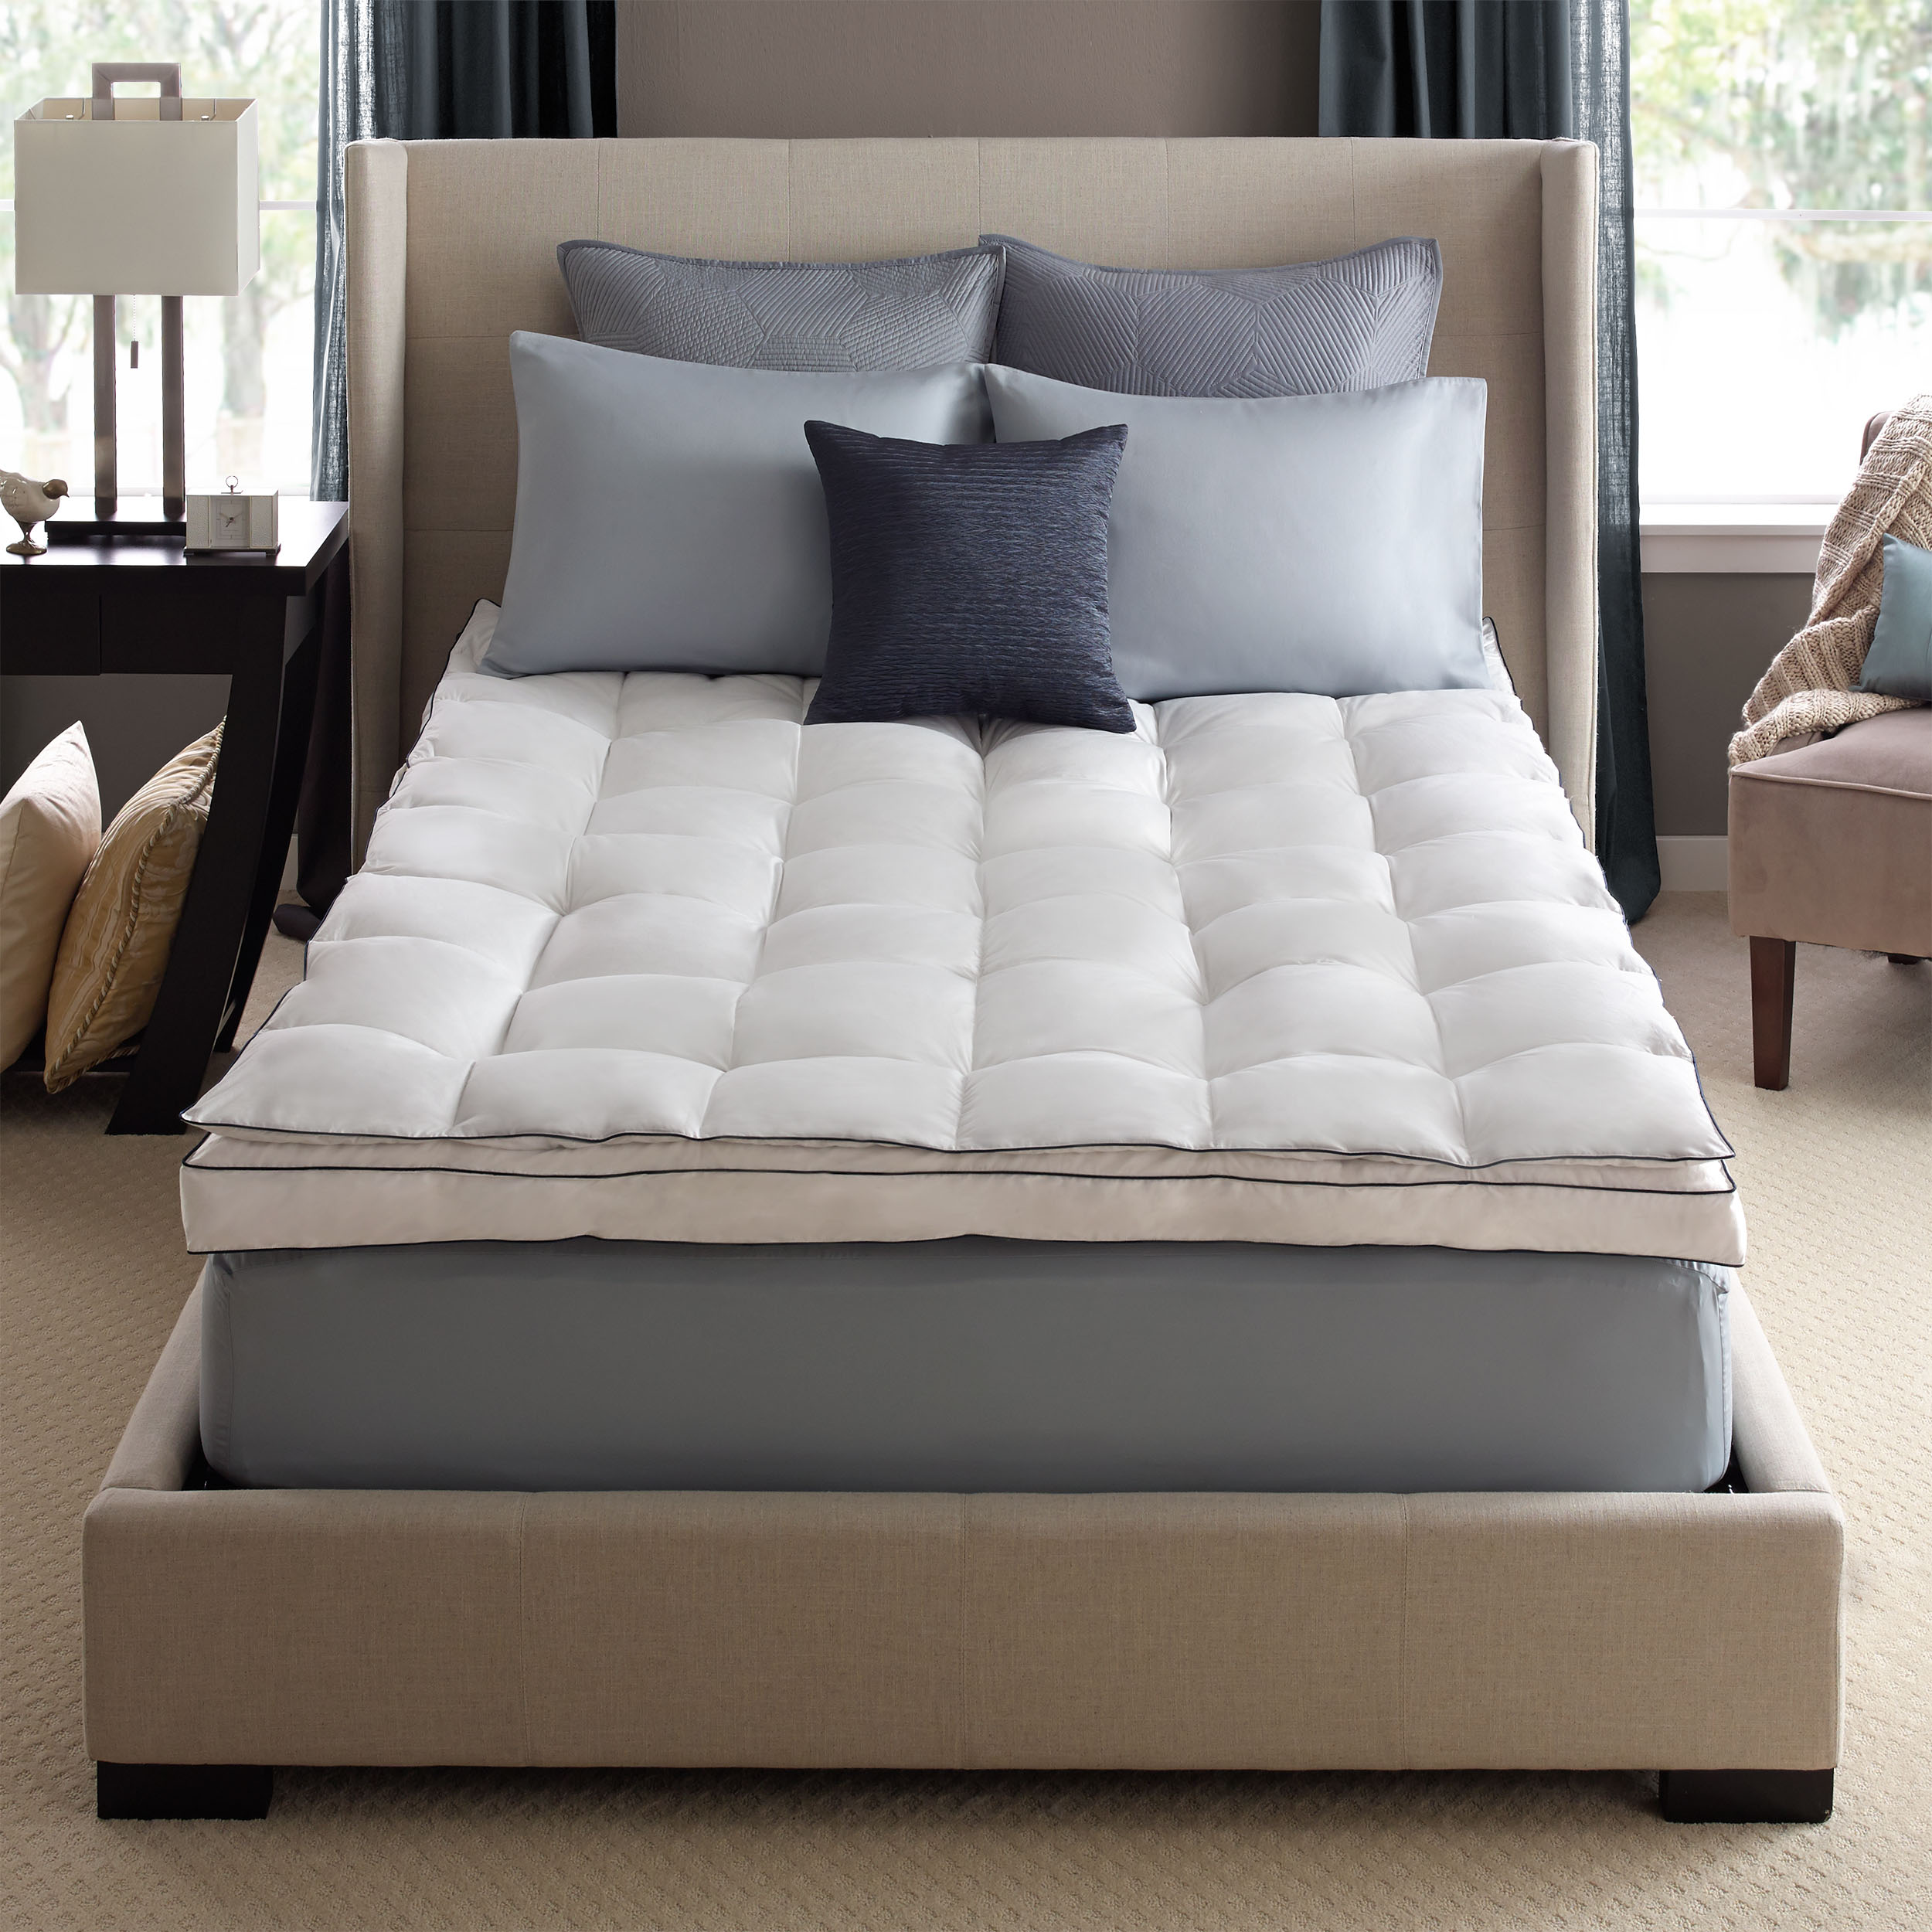 Pacific Coast Down On Top Feather Bed Mattress Topper 230 Thread Count Feathers 525 Fill Power Down - Calking